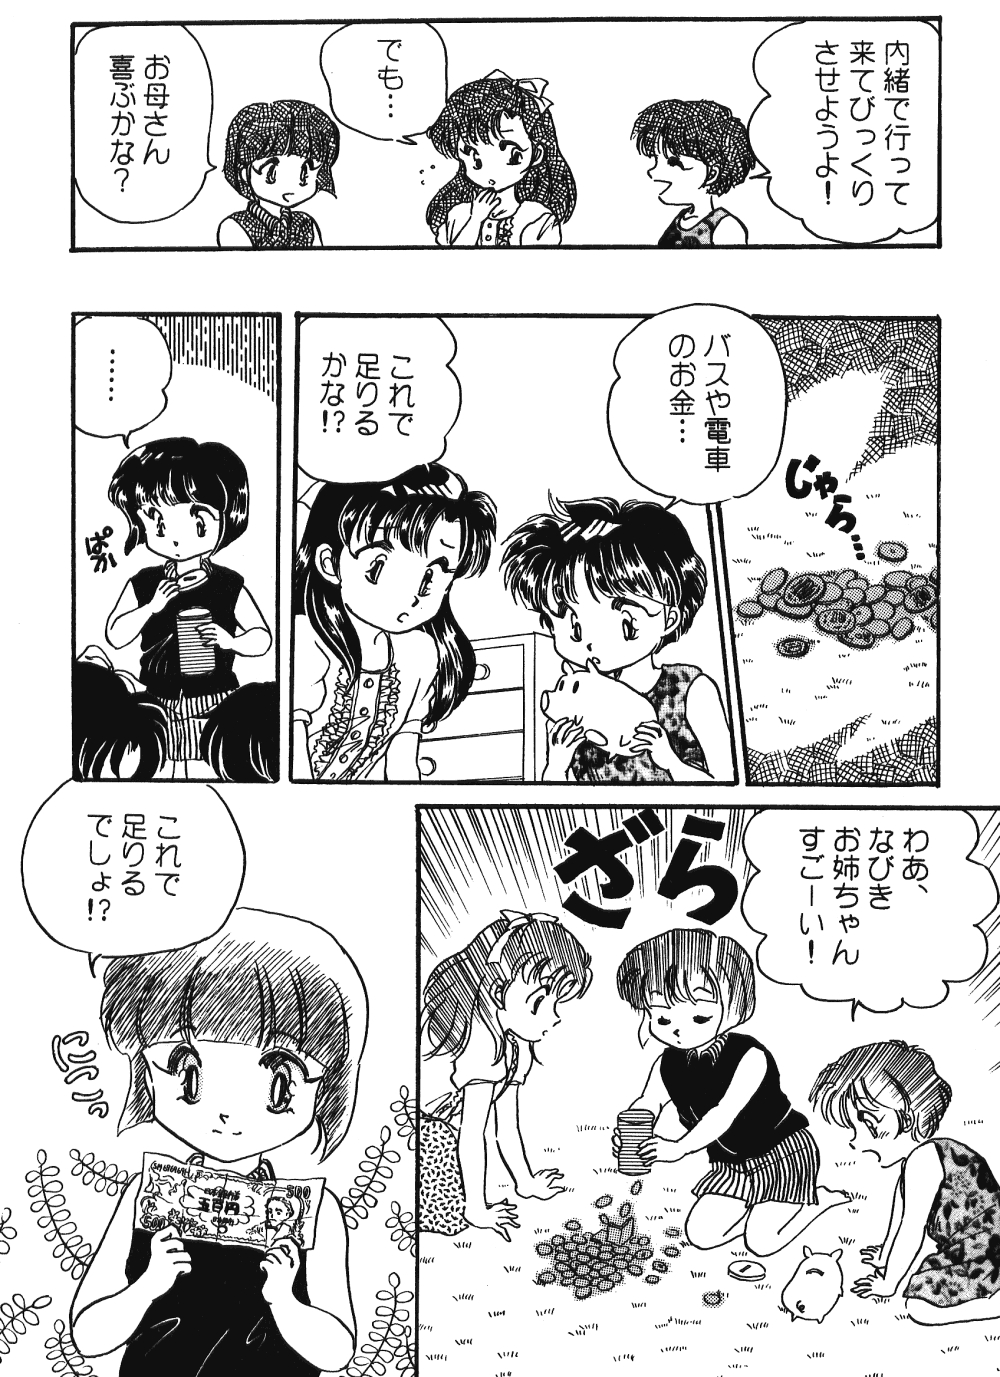 Never Forget Summer (Ranma 1/2) 7